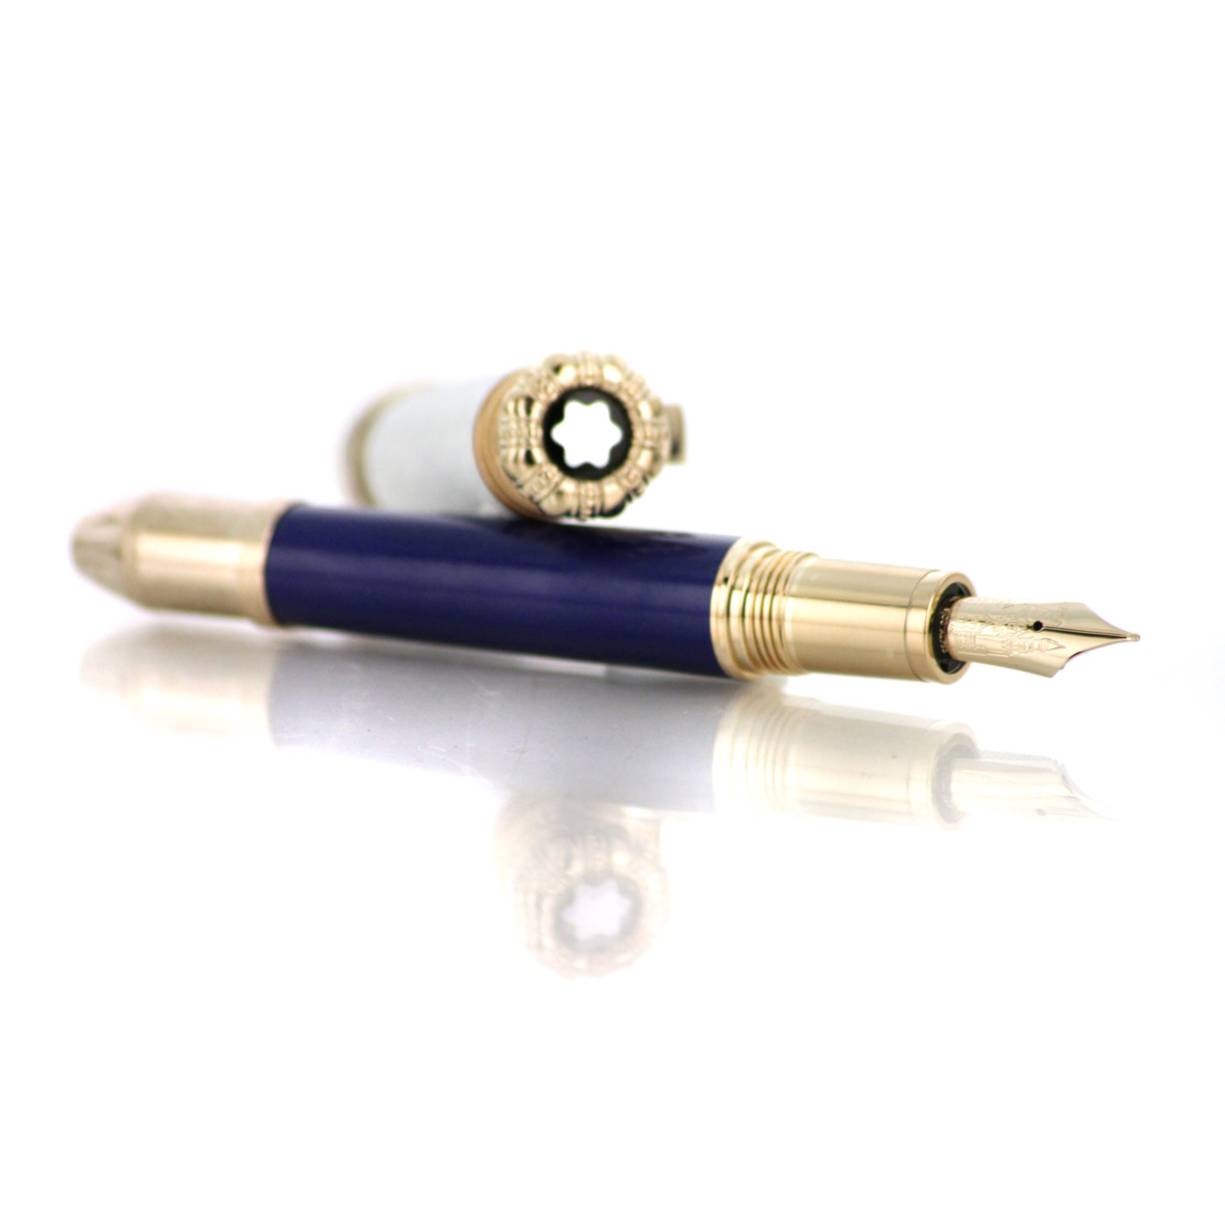 montblanc_patron_of_the_art_hommage_at_ludwig_ii_limited_edition_4810_fountain_pen_117842__15_